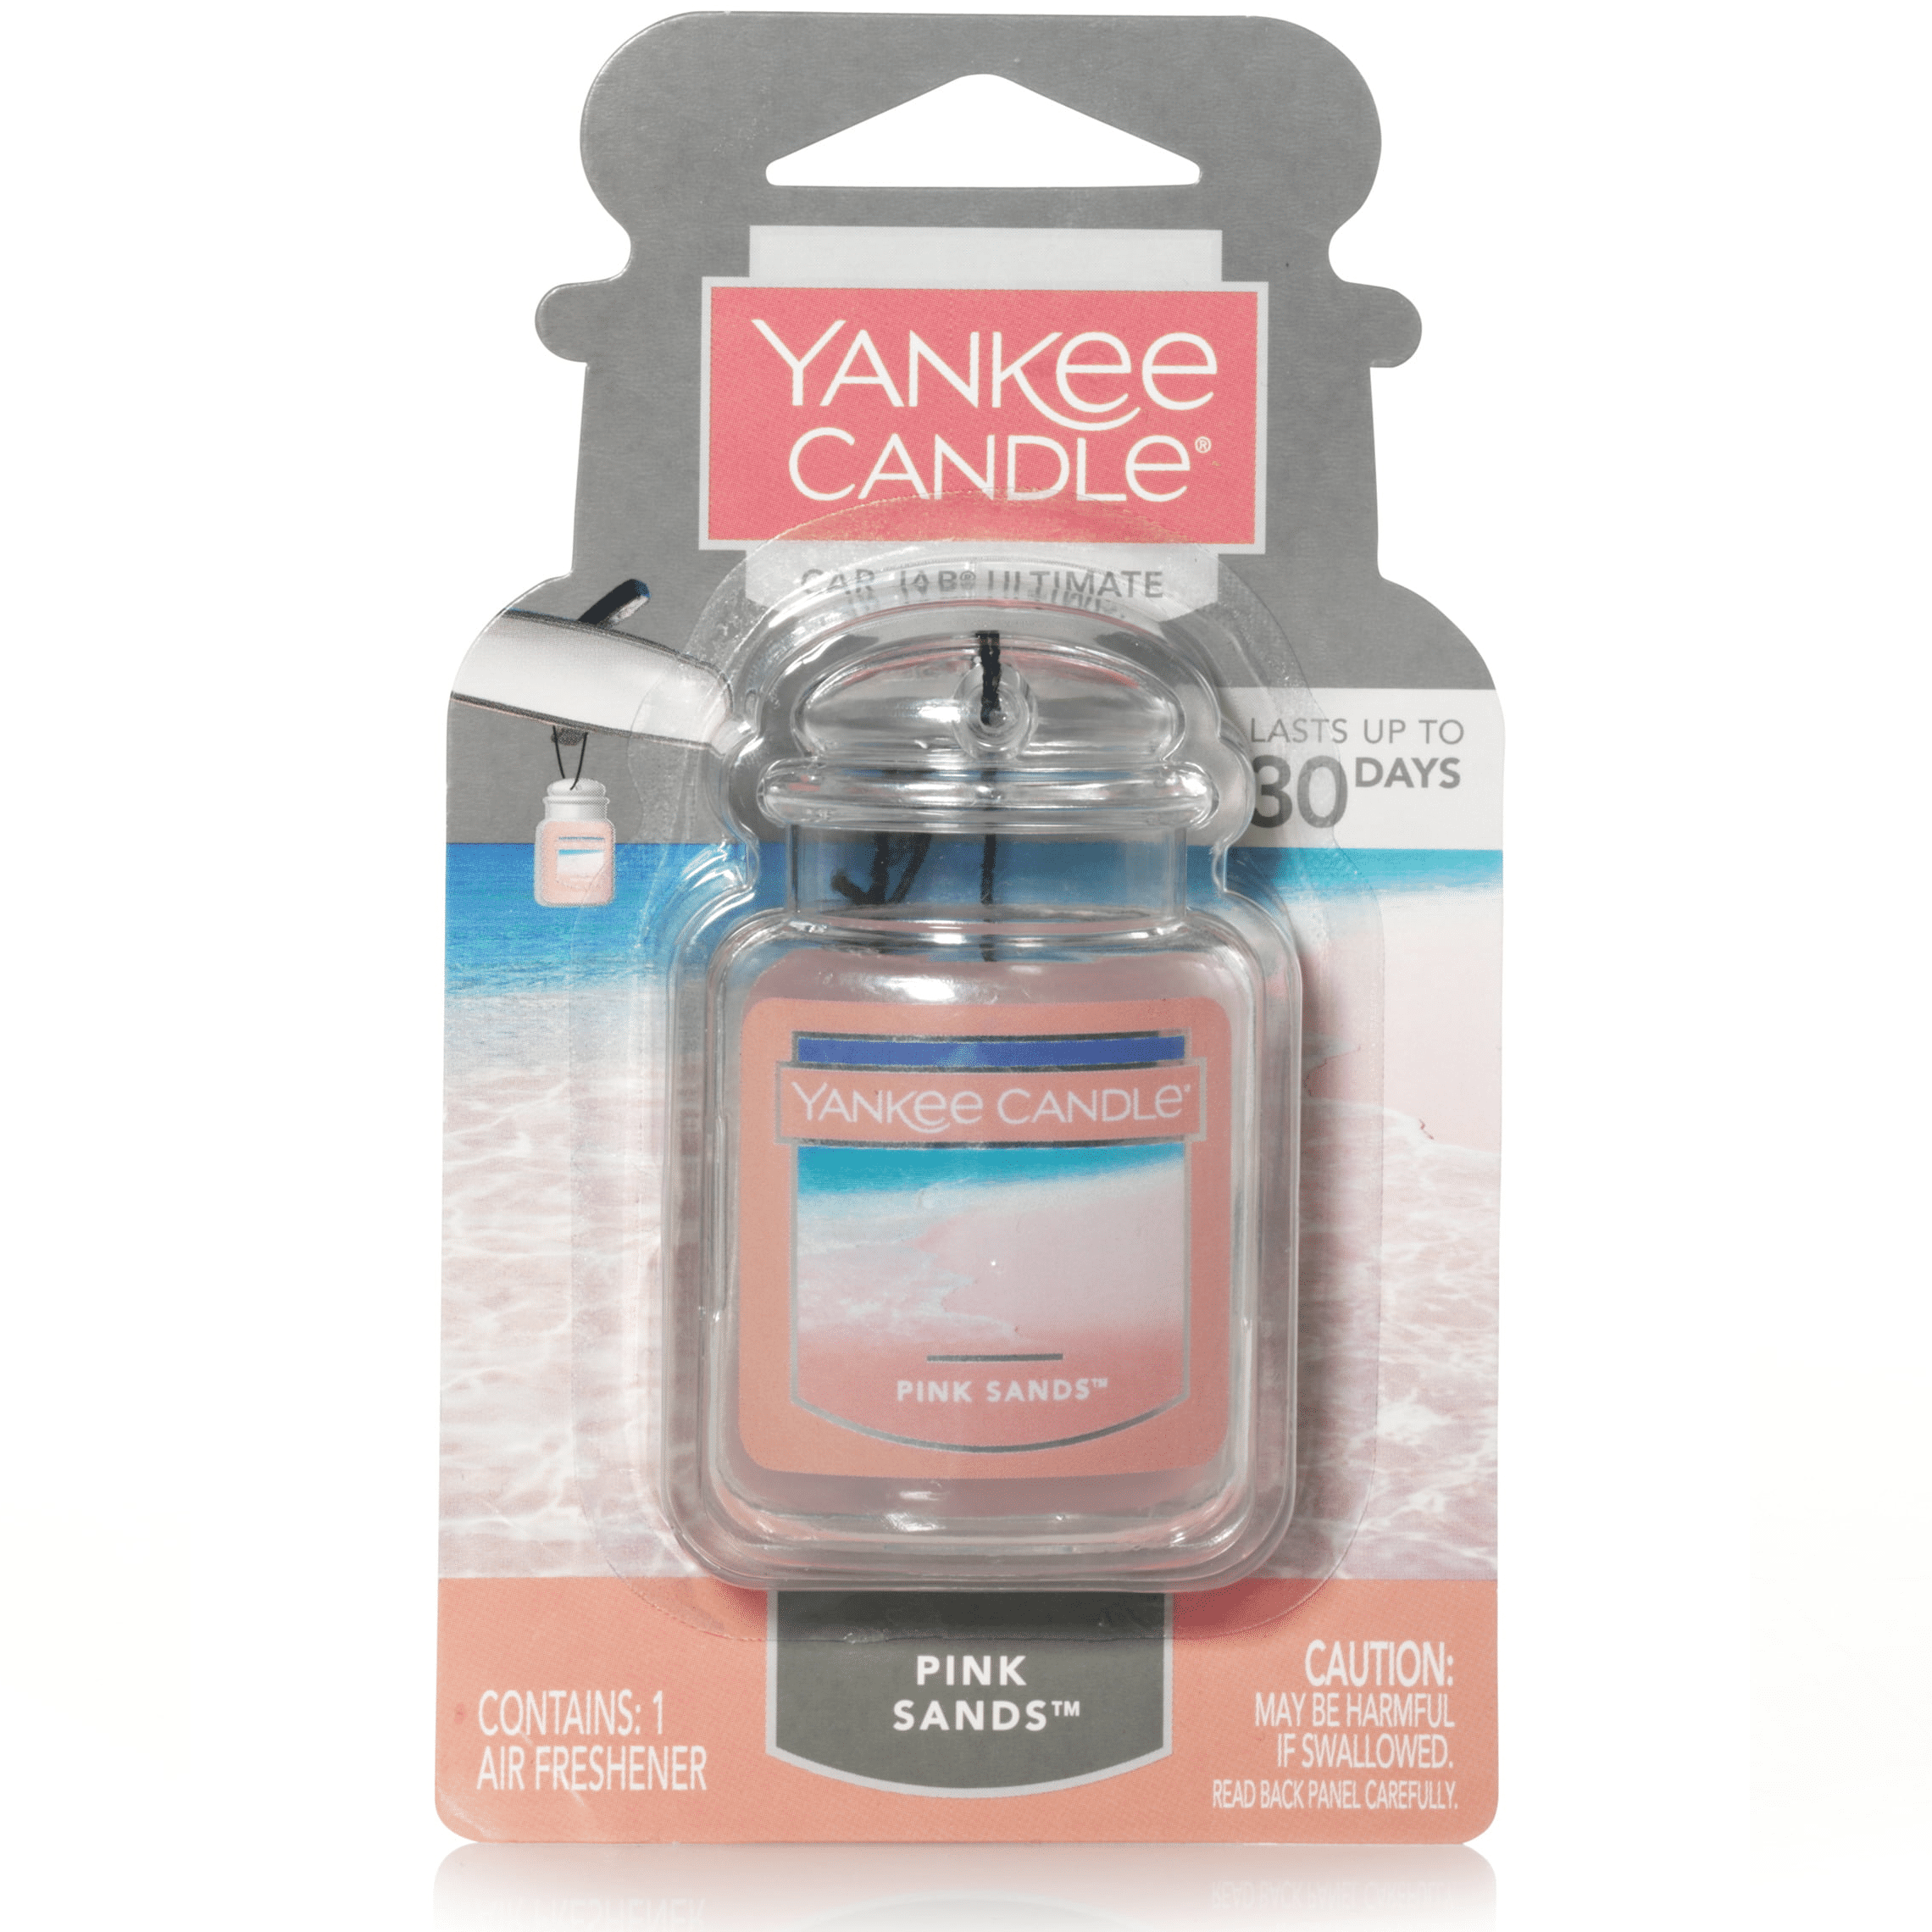 Yankee Candle Whole Home- Pink Sands Air Filter Freshener in the Air Filter  Accessories department at